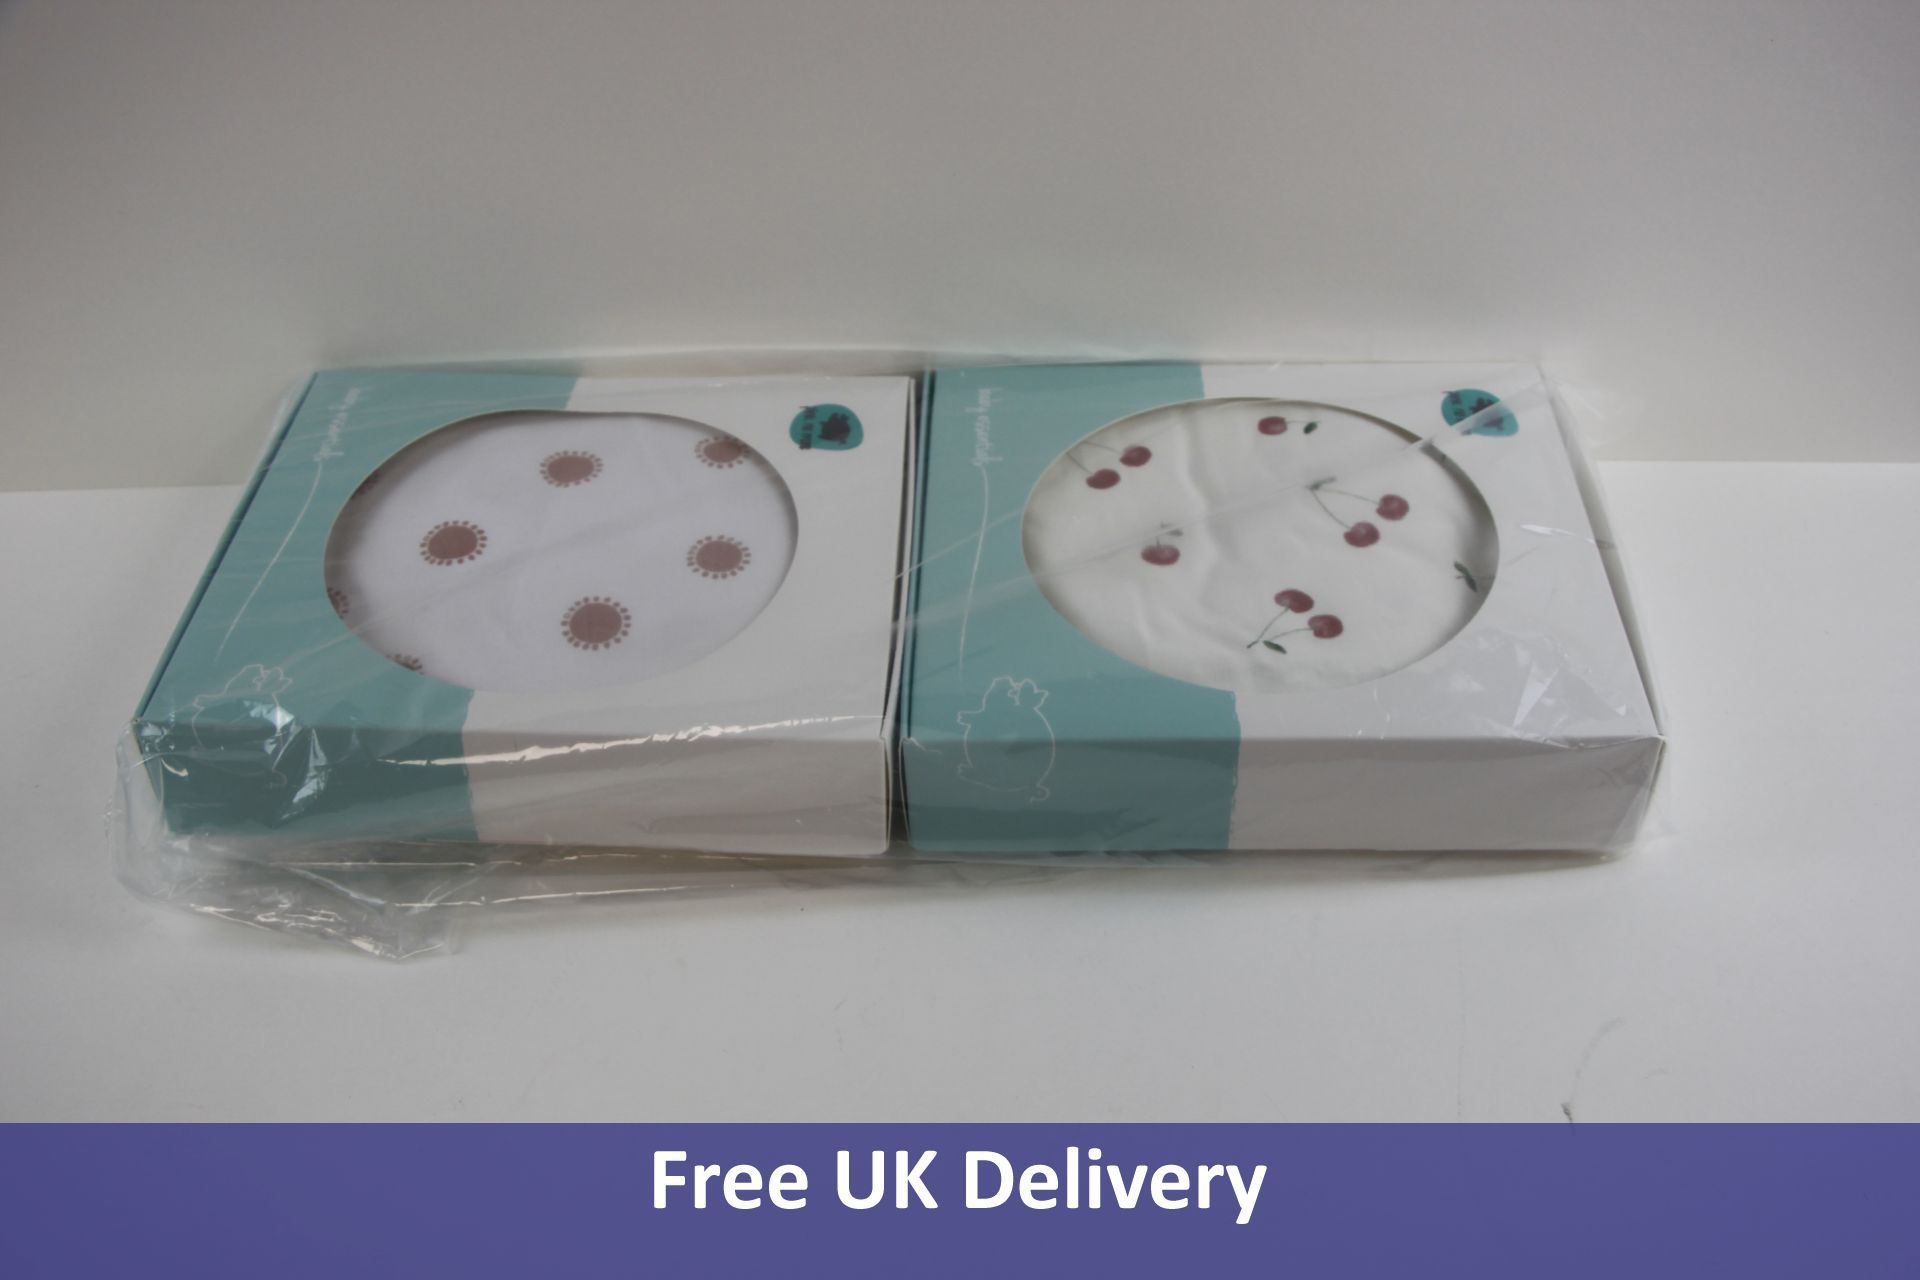 Two Pink No More Baby Cot Sheets 1x Cherries, 1x Suns Designs, White, 140x70 cm